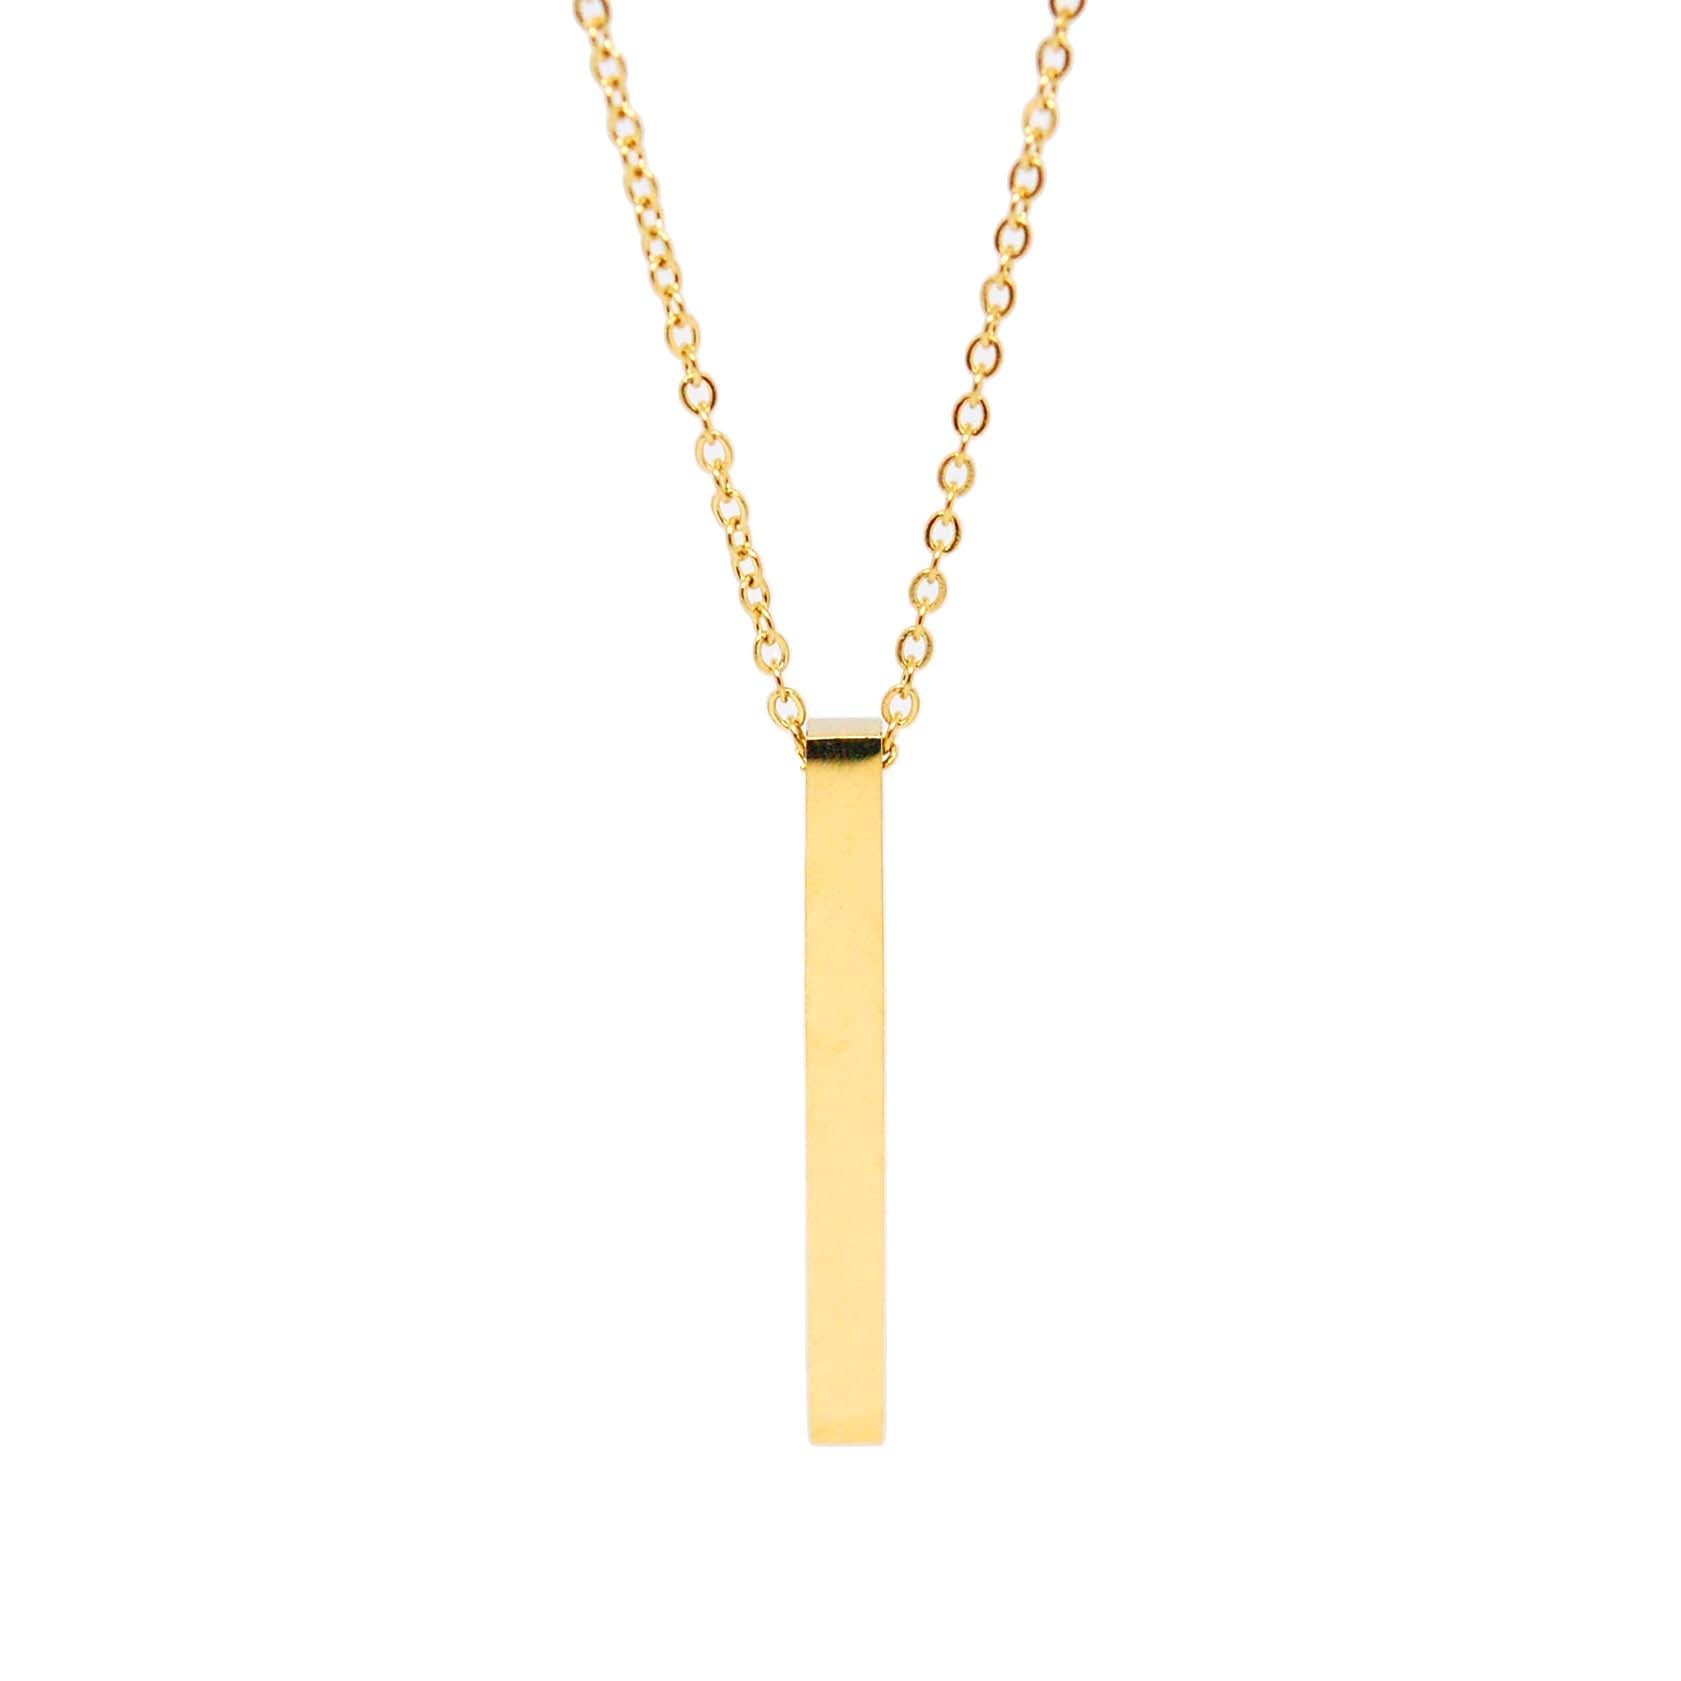 ESN 7951: All IPG IPG 35mm Engravable Bar Necklace (w/ 18"+2"Chain)